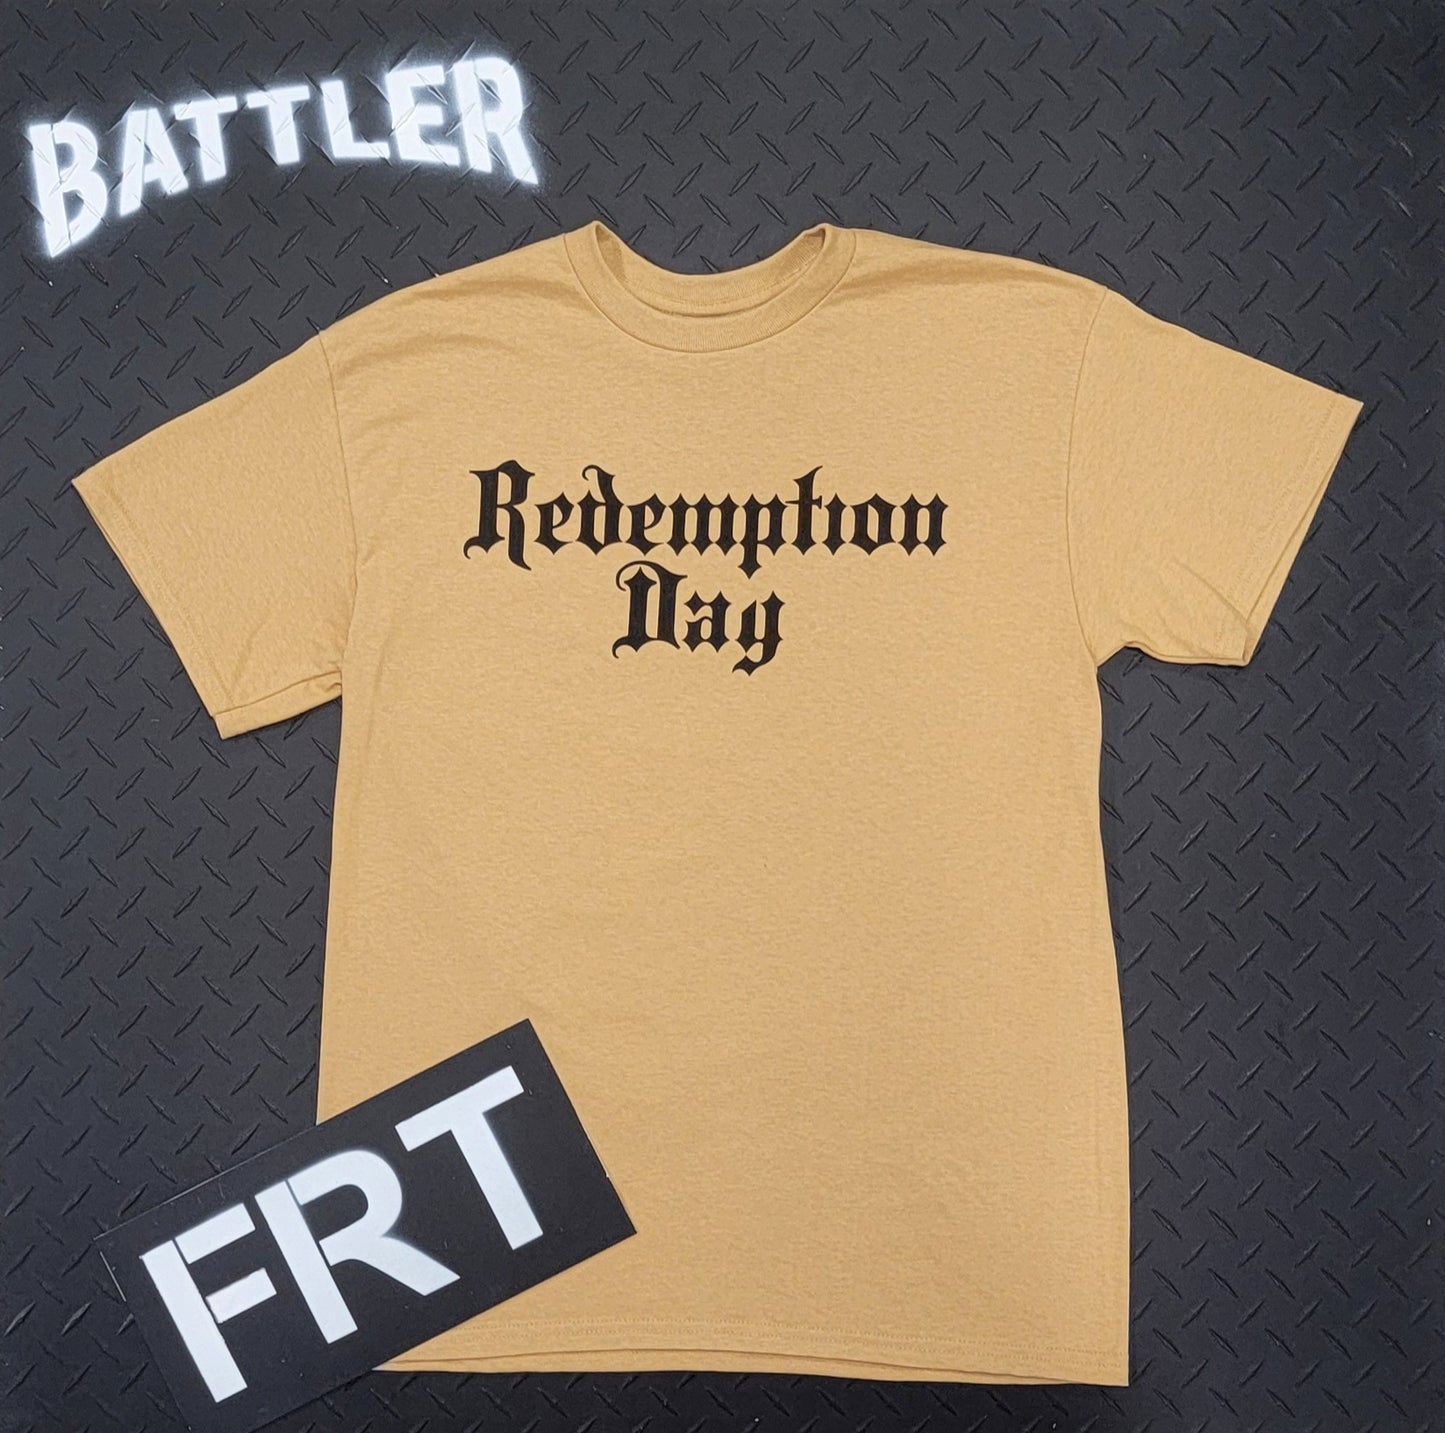 Double-Sided Redemption Day / Deut 20:4 Tee (Black on Old Gold)